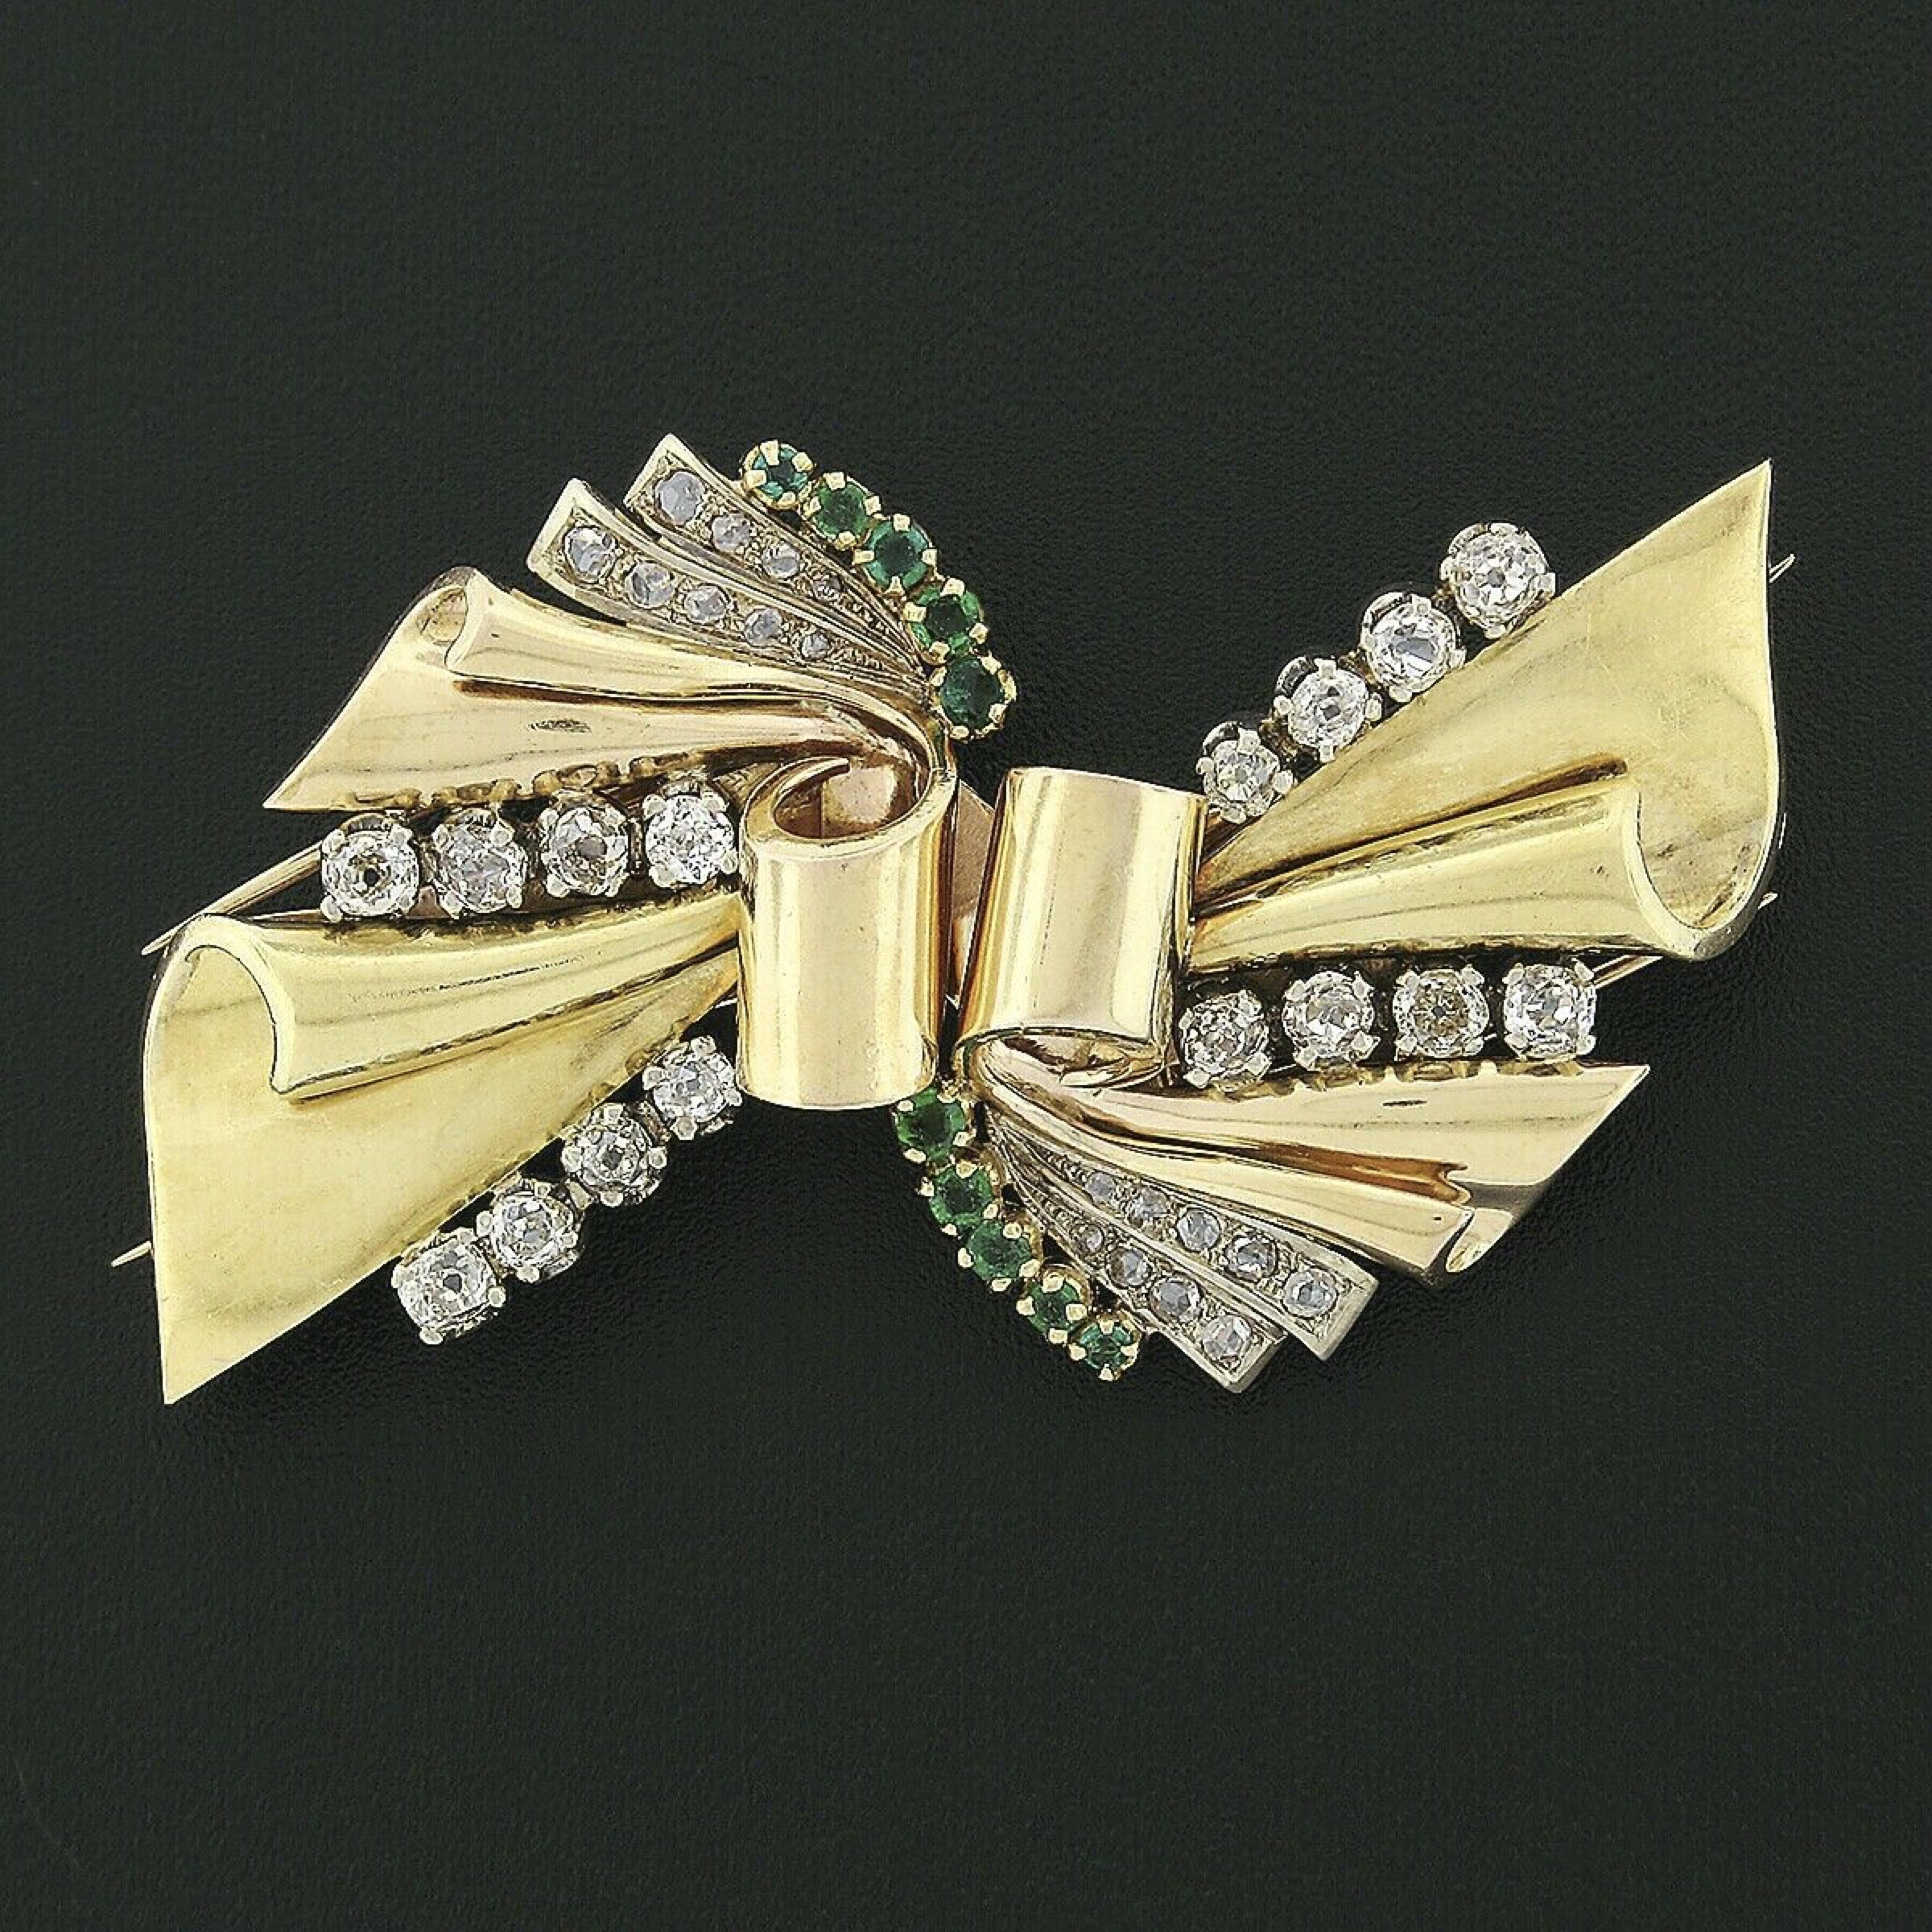 Here we have a gorgeous and very lovely pair of antique ribbon-style dress clips that were crafted from solid 18k rosy yellow and green gold. The clips display a beautiful patina which has been preserved along with its original finish throughout